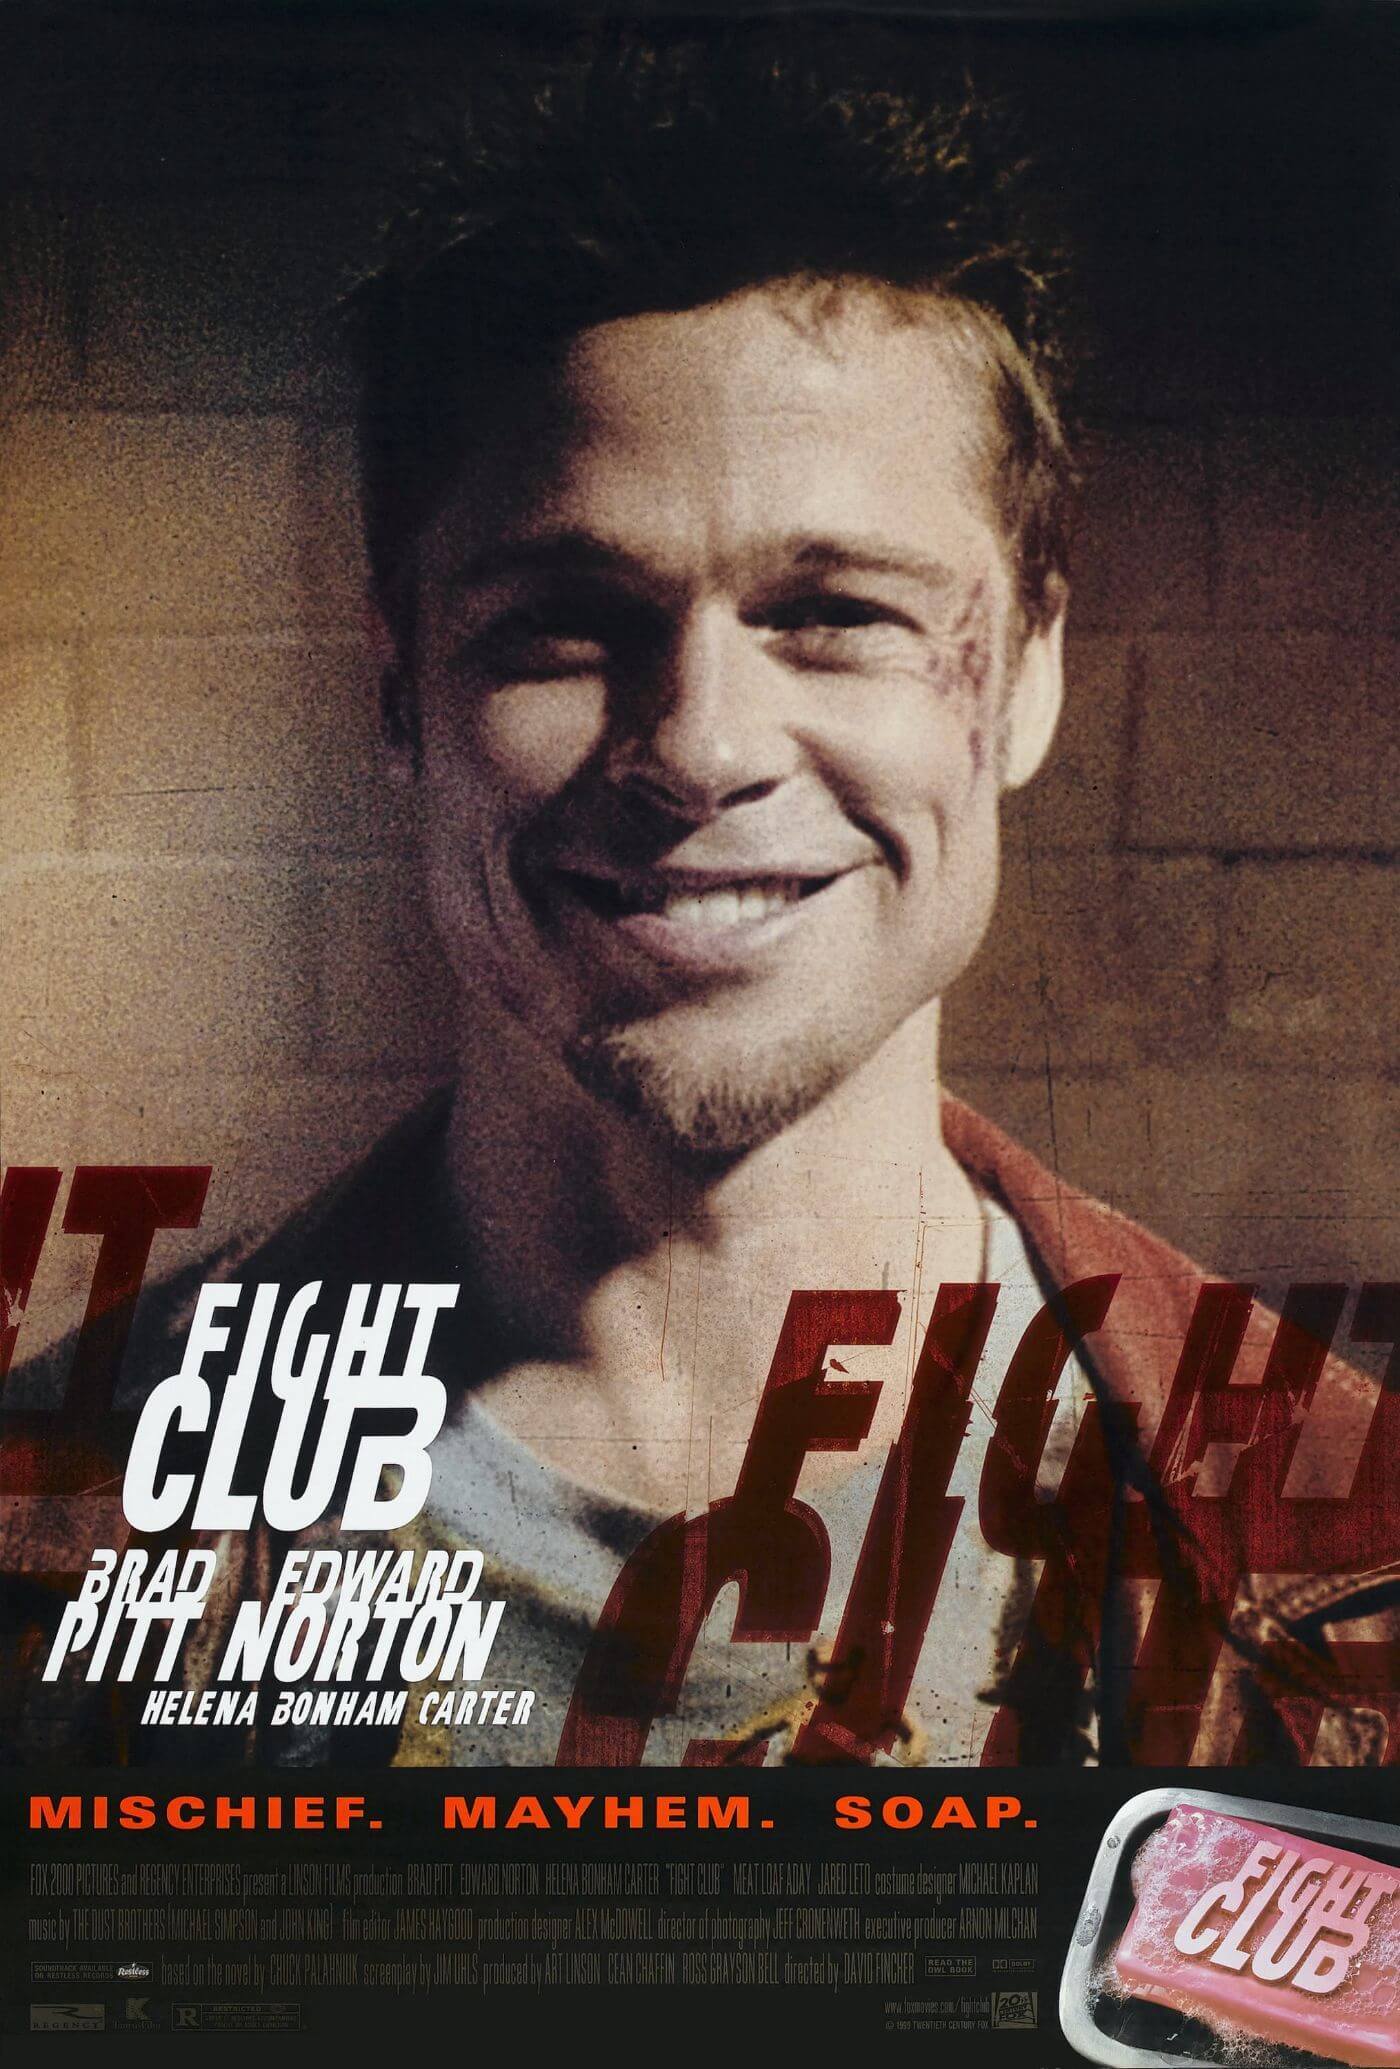 Fight Club - Brad Pitt - Hollywood Cult Classic English Movie Poster - Art  Prints by Alice | Buy Posters, Frames, Canvas & Digital Art Prints | Small,  Compact, Medium and Large Variants